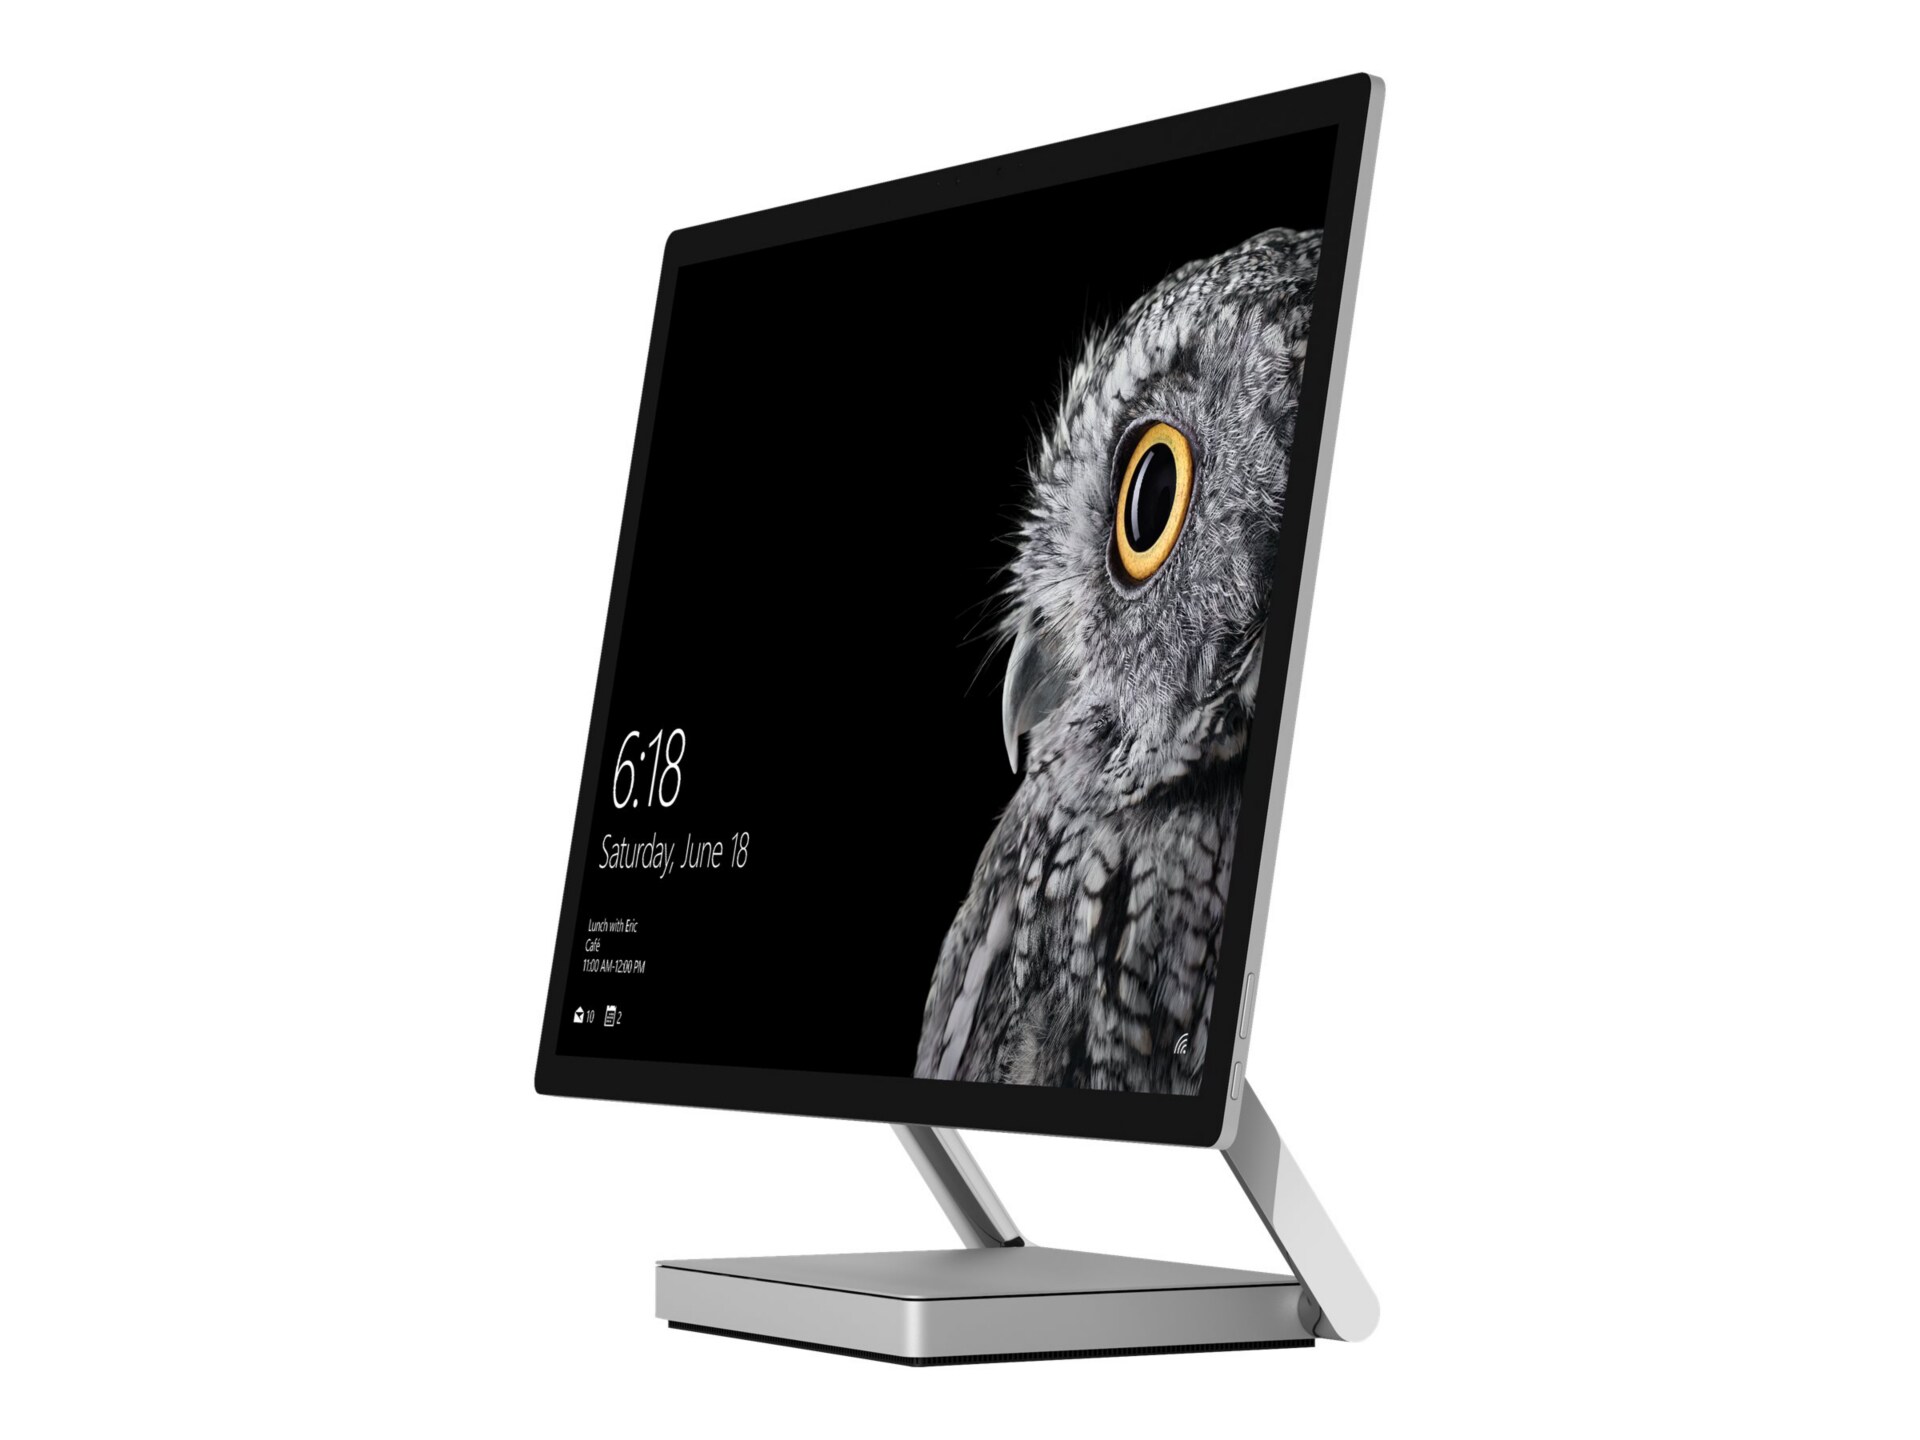 Microsoft Surface Studio - all-in-one - Core i5 6440HQ 2.6 GHz - 8 GB - 1 TB - LCD 28" - English - North American layout